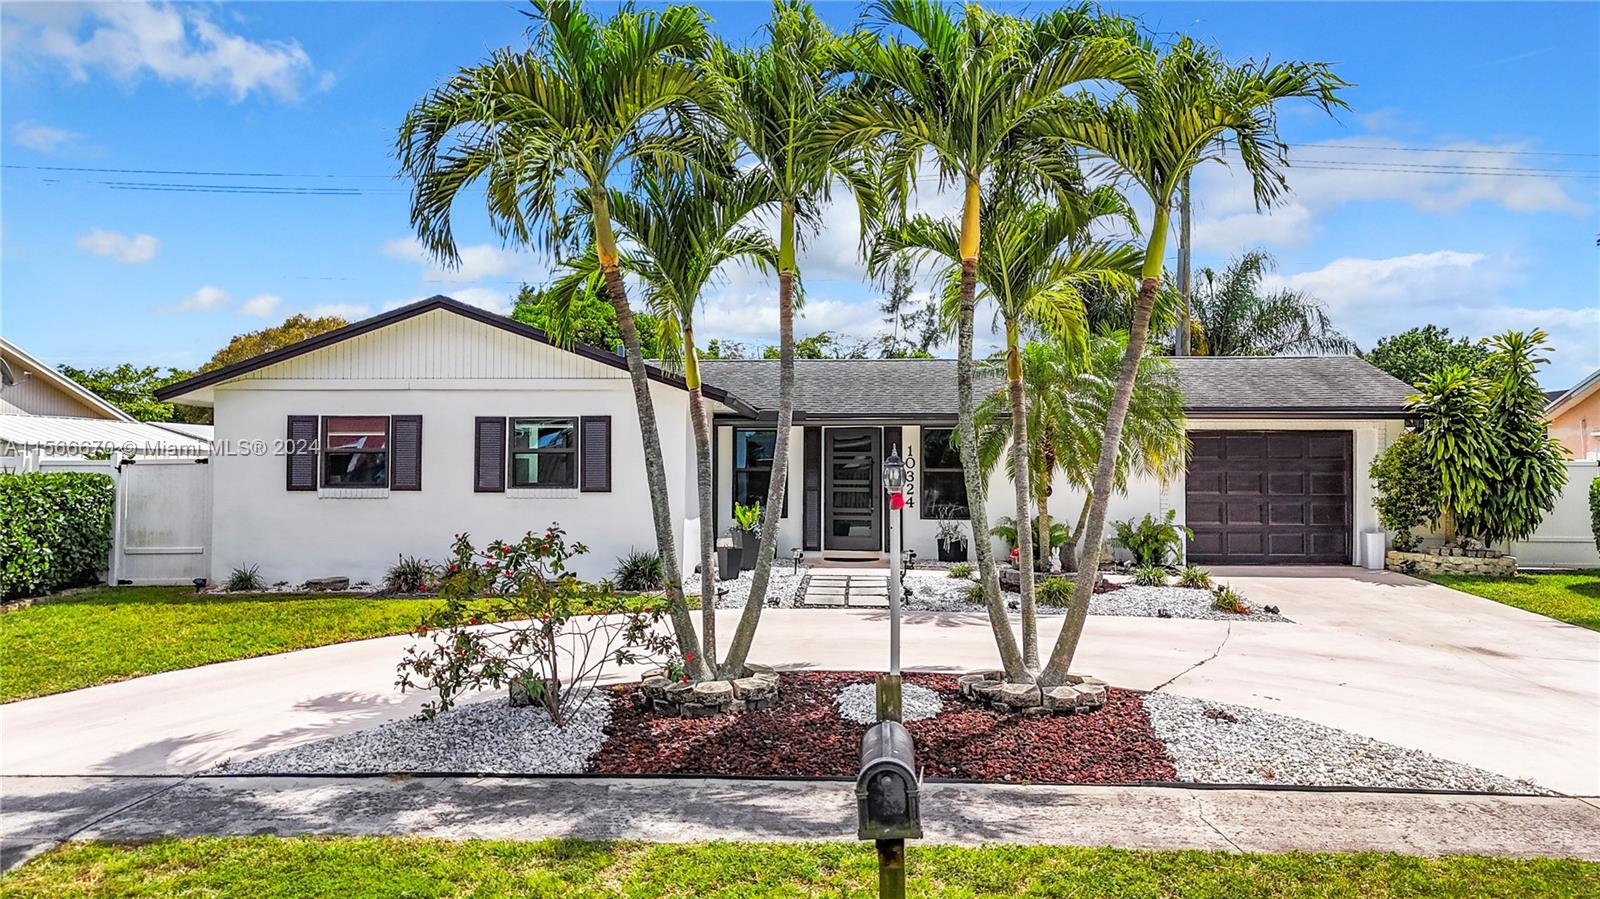 Welcome to your dream home in Boca Raton! This stunning residence offers a perfect blend of luxury, 